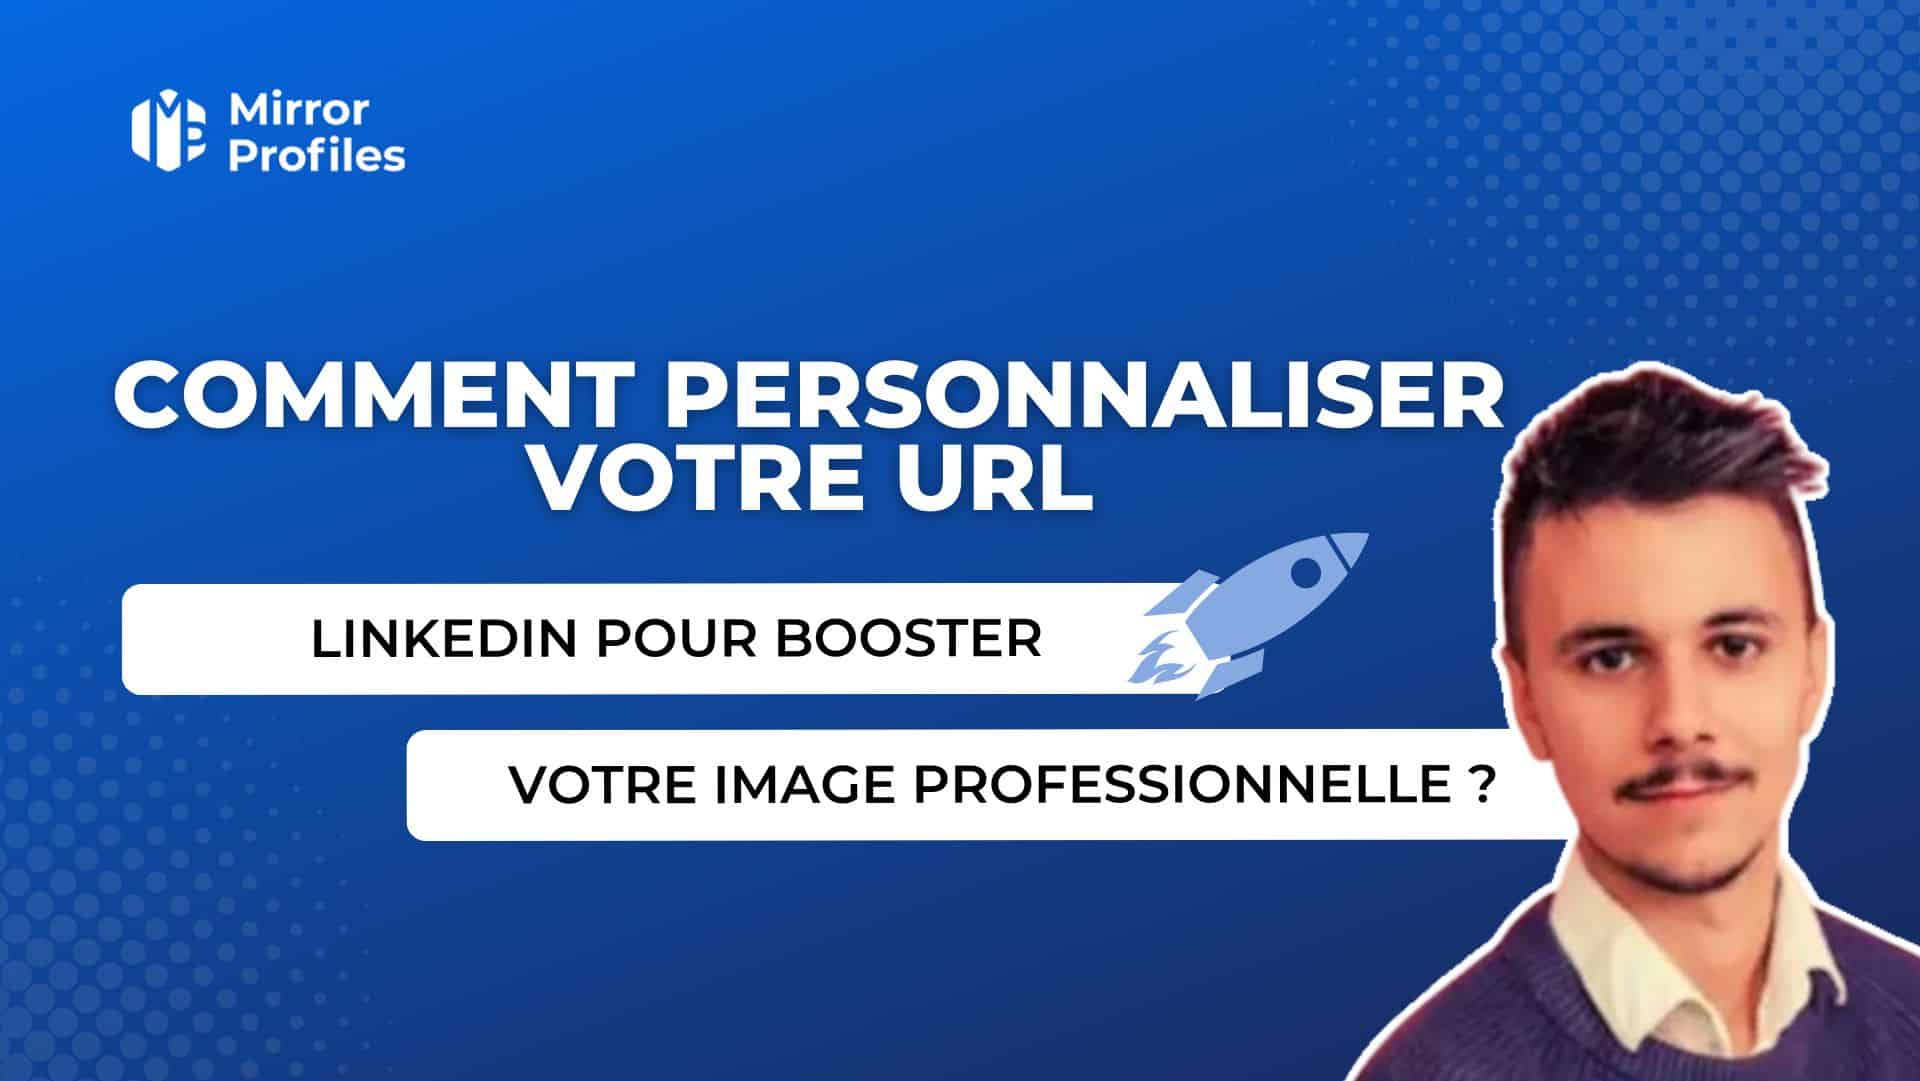 A promotional graphic in French titled "Comment Personnaliser Votre URL LinkedIn" with a man's portrait and text about how to customize your LinkedIn URL to boost your professional image.